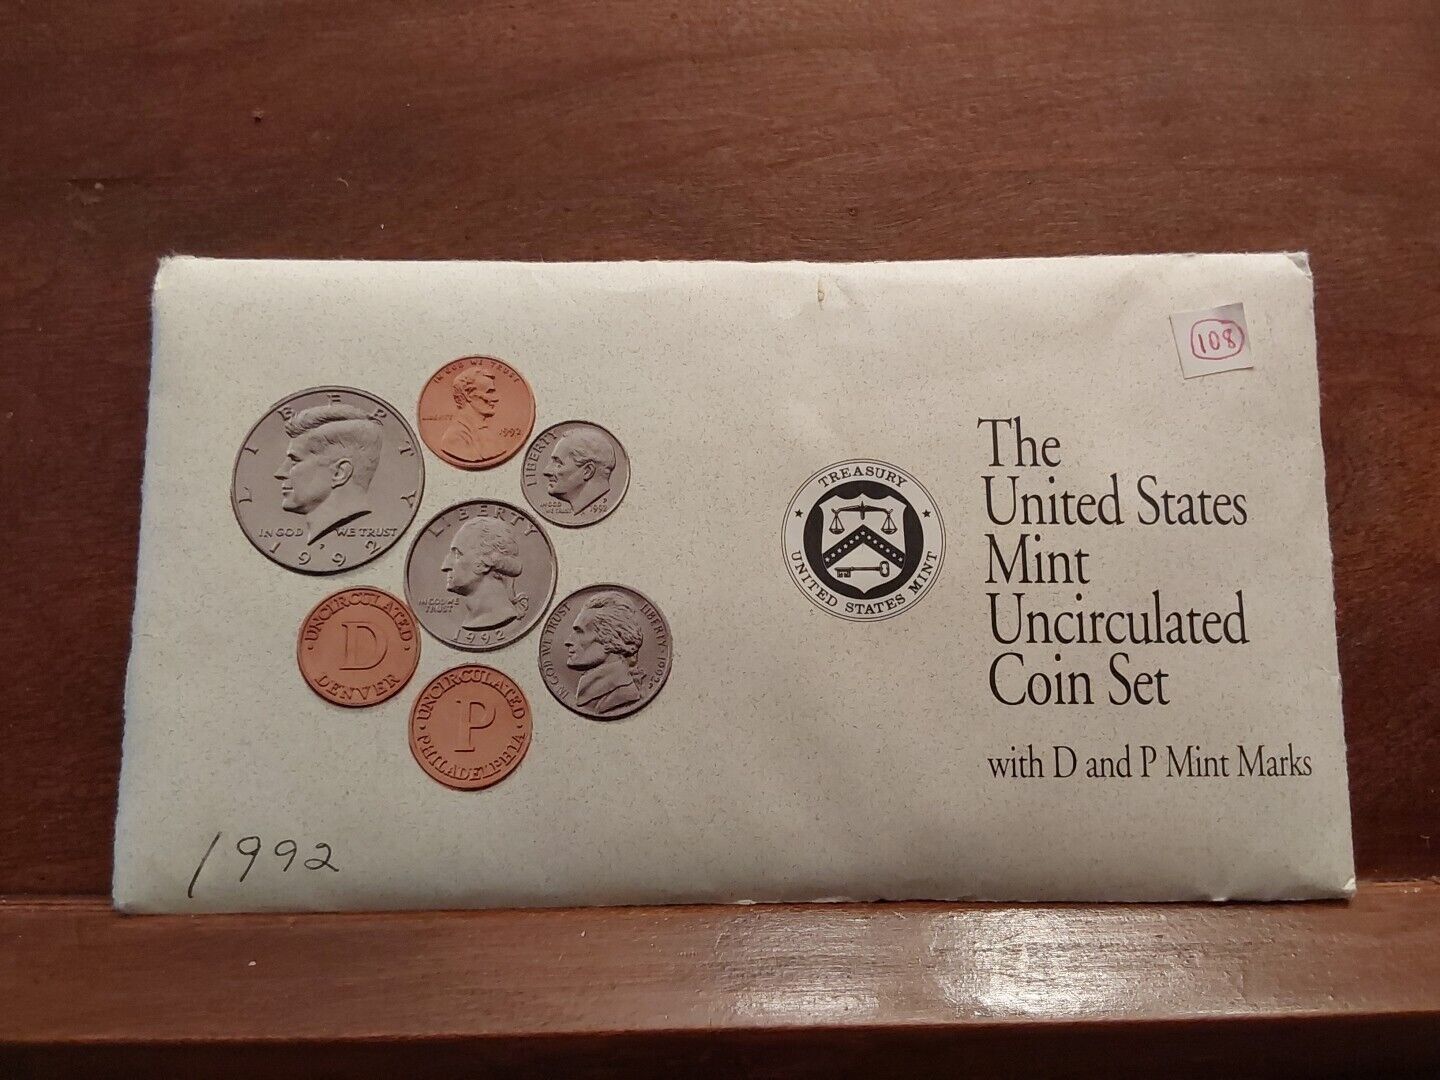 1992 UNITED STATES MINT UNCIRCULATED COIN SET IN ORIGINAL PACKAGING 12 COIN SET